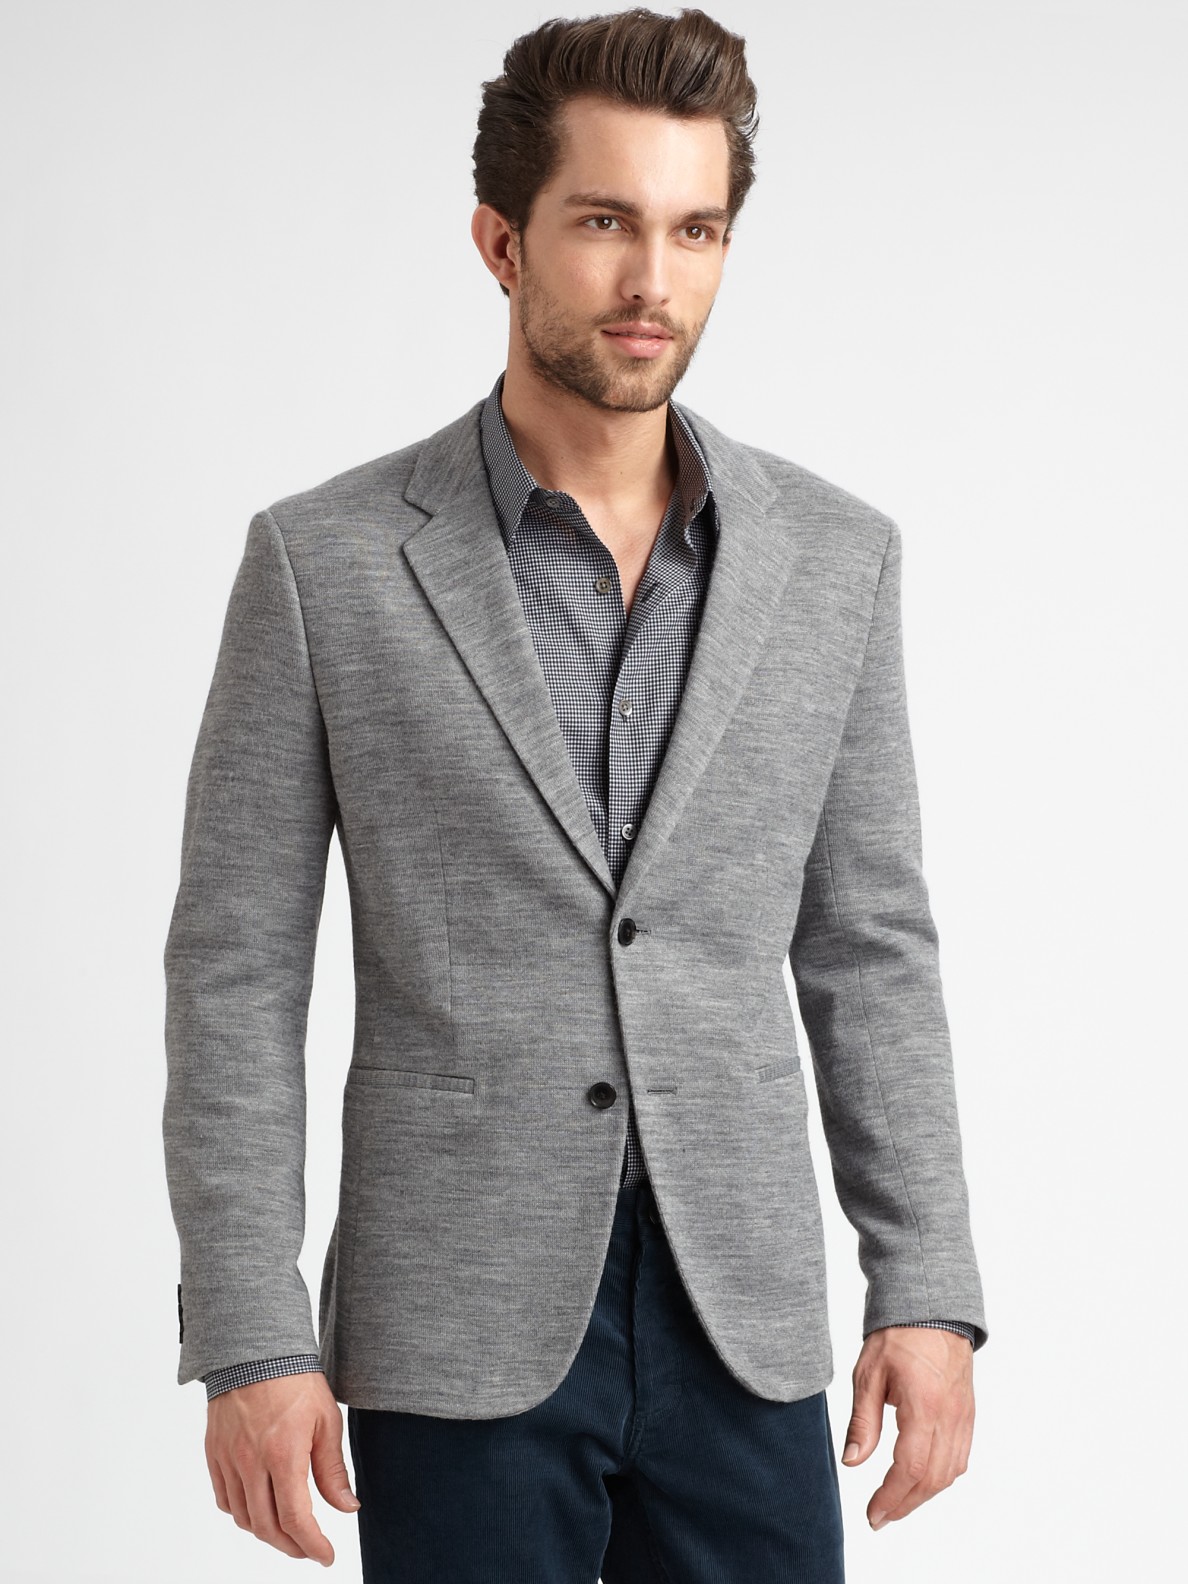 Lyst - Theory Knit Blazer in Gray for Men